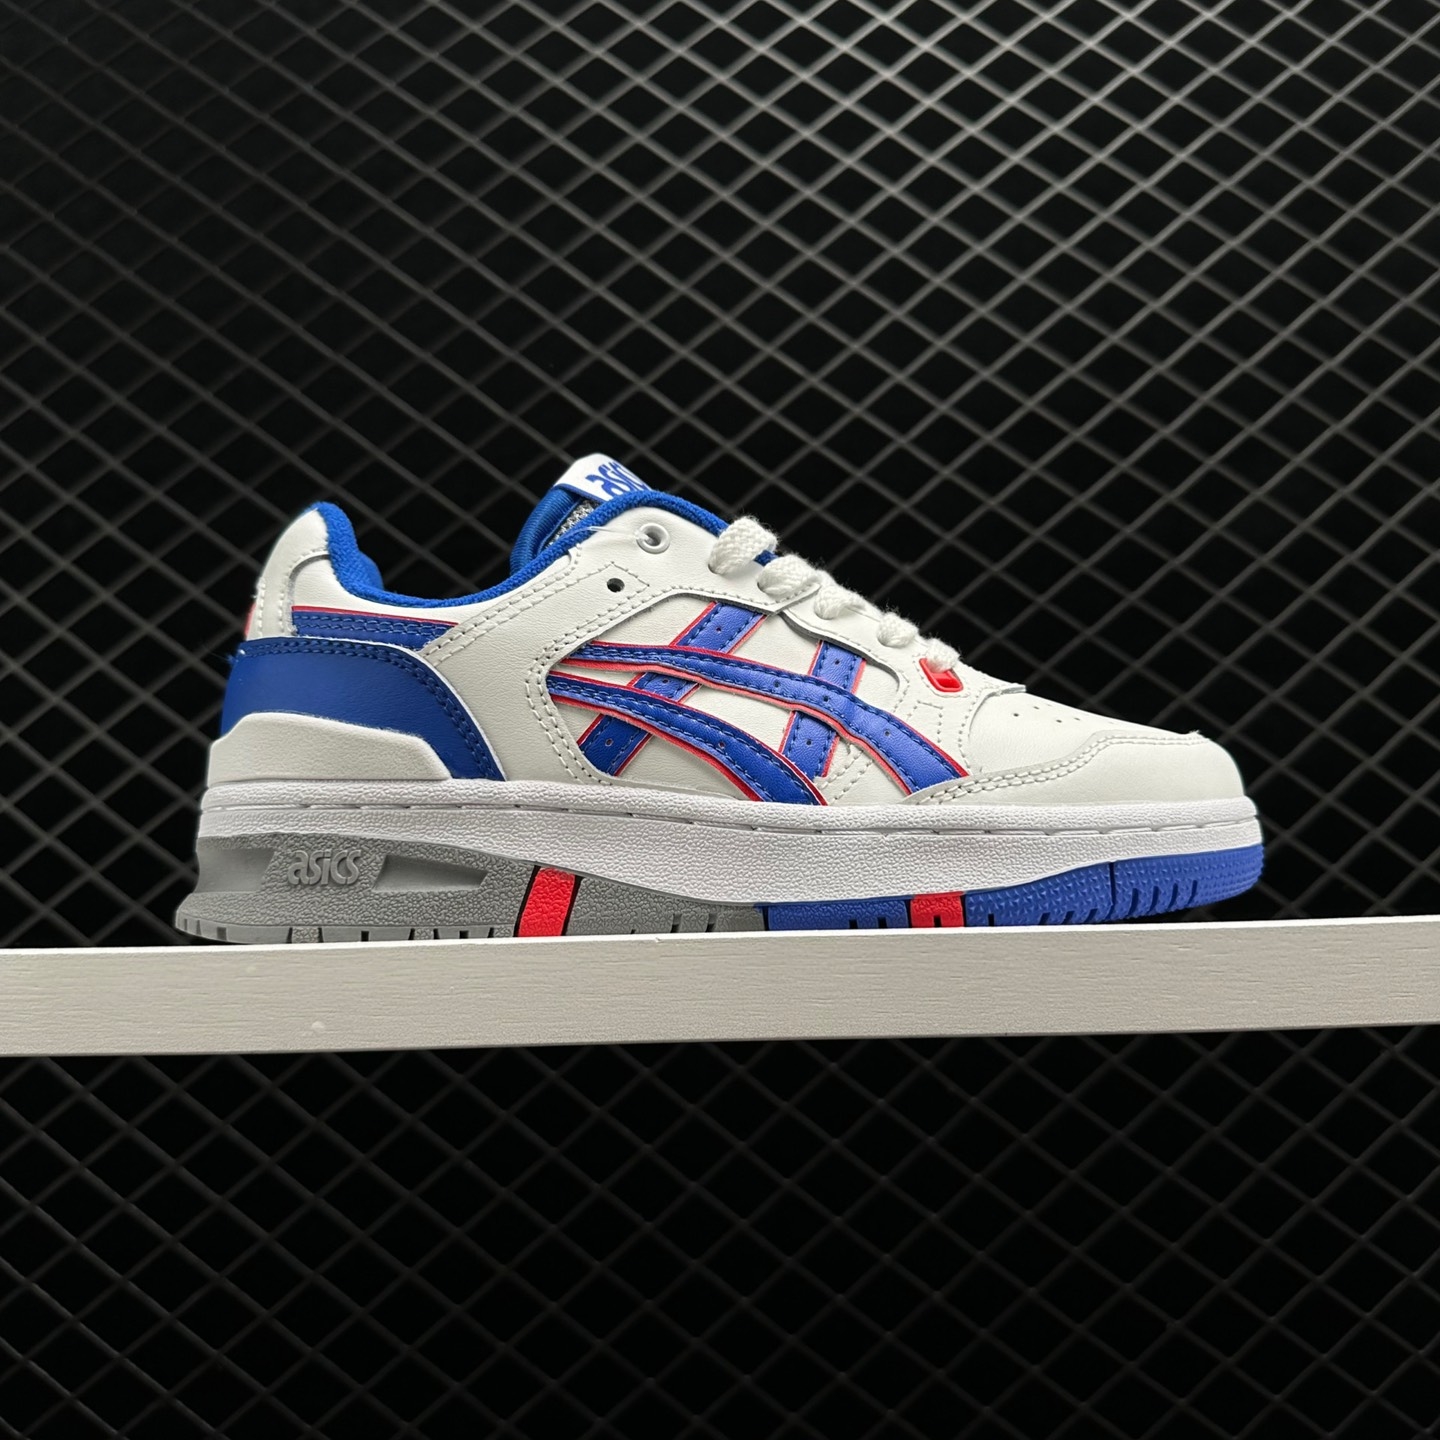 Asics EX89 'Knicks' 1201A476-101 - Stylish and Functional Footwear | Buy Now